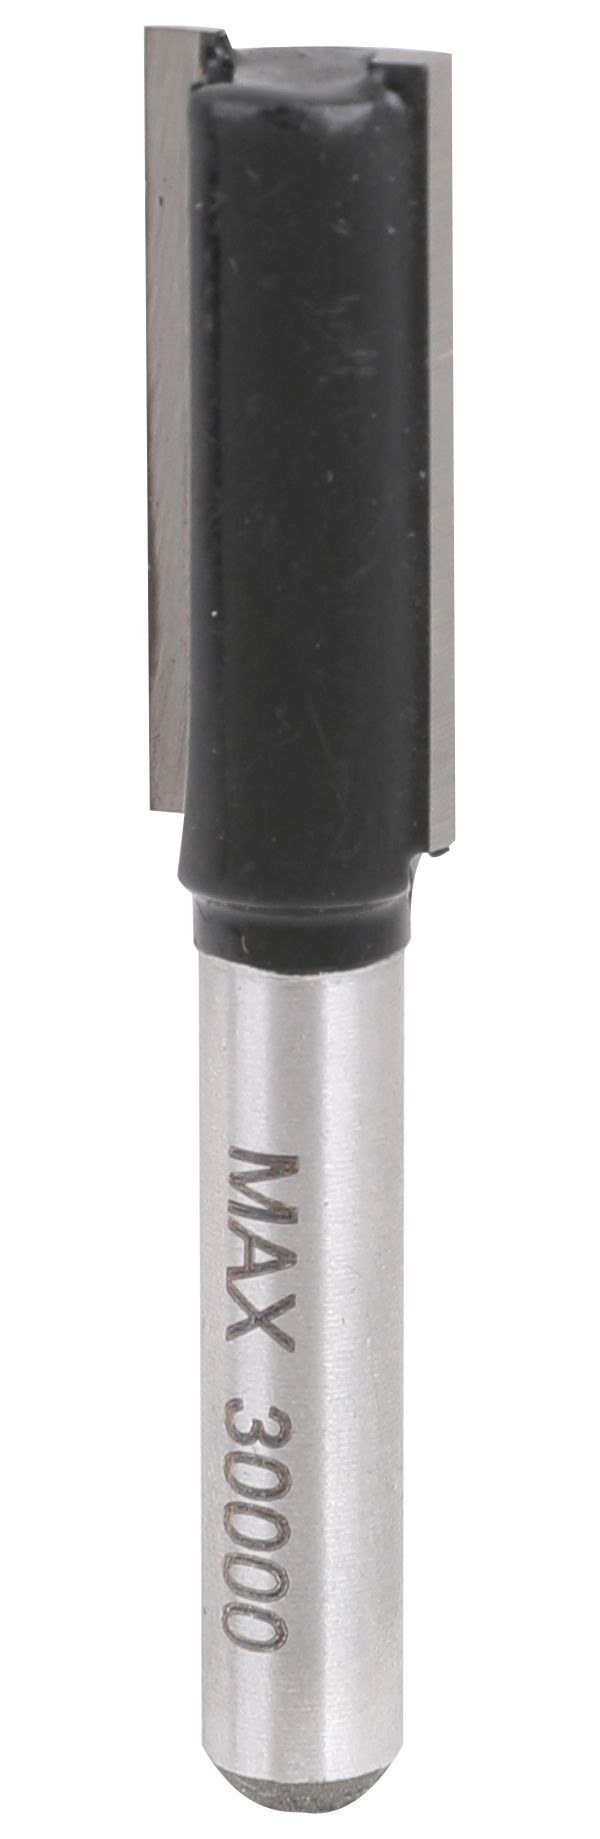 Image of Wickes Straight Router Bit 1/4in - 10mm